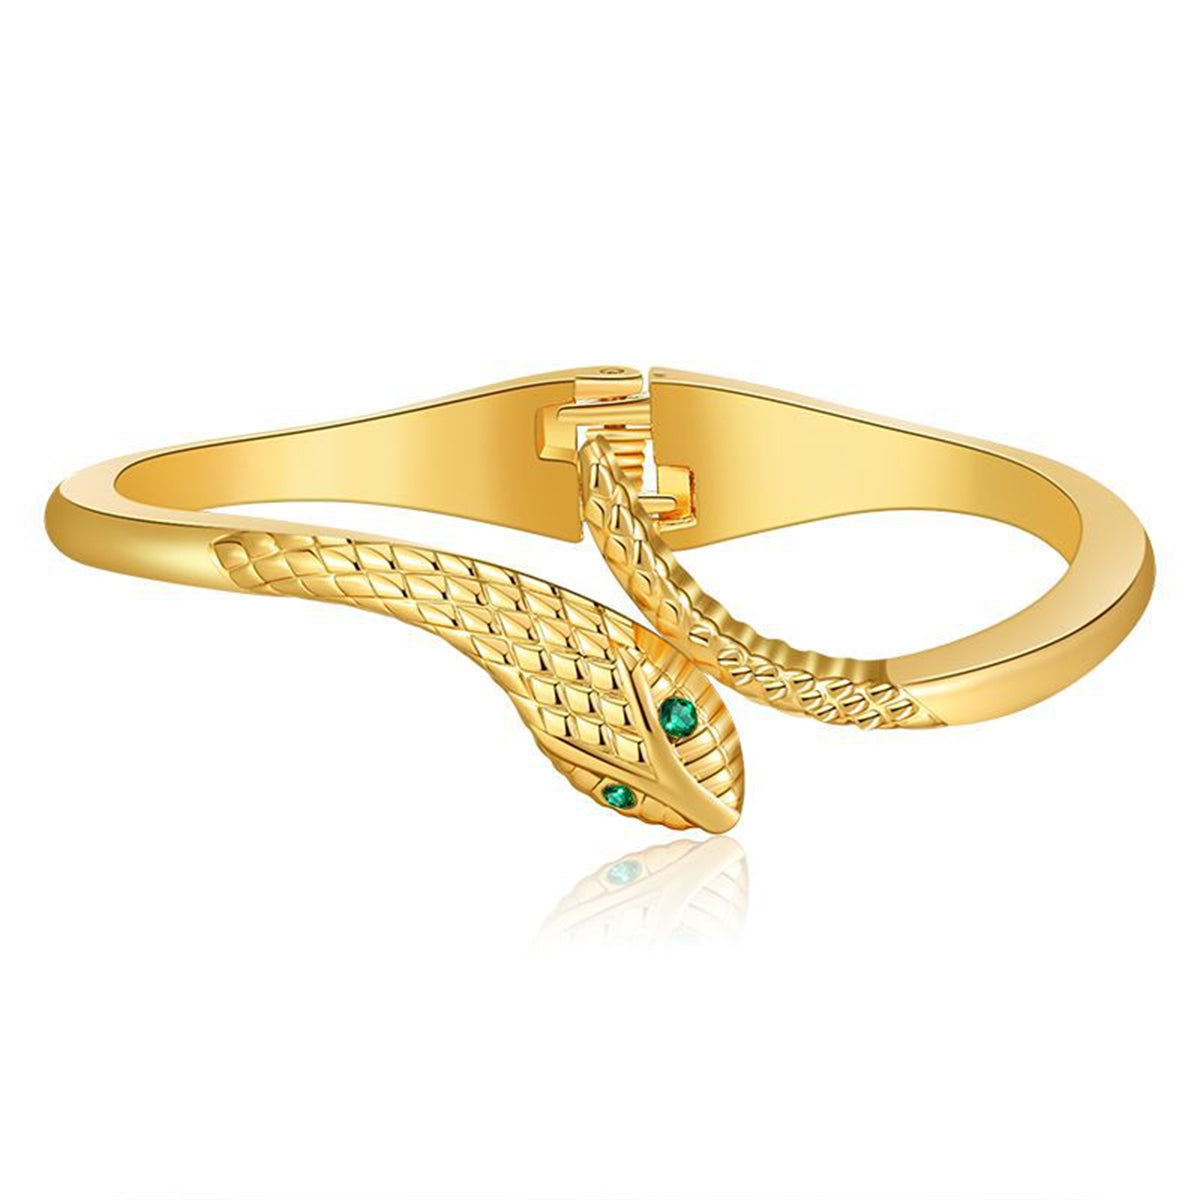 Green Cubic Zirconia & 18K Gold-Plated Snake Bypass Hinge Bangle